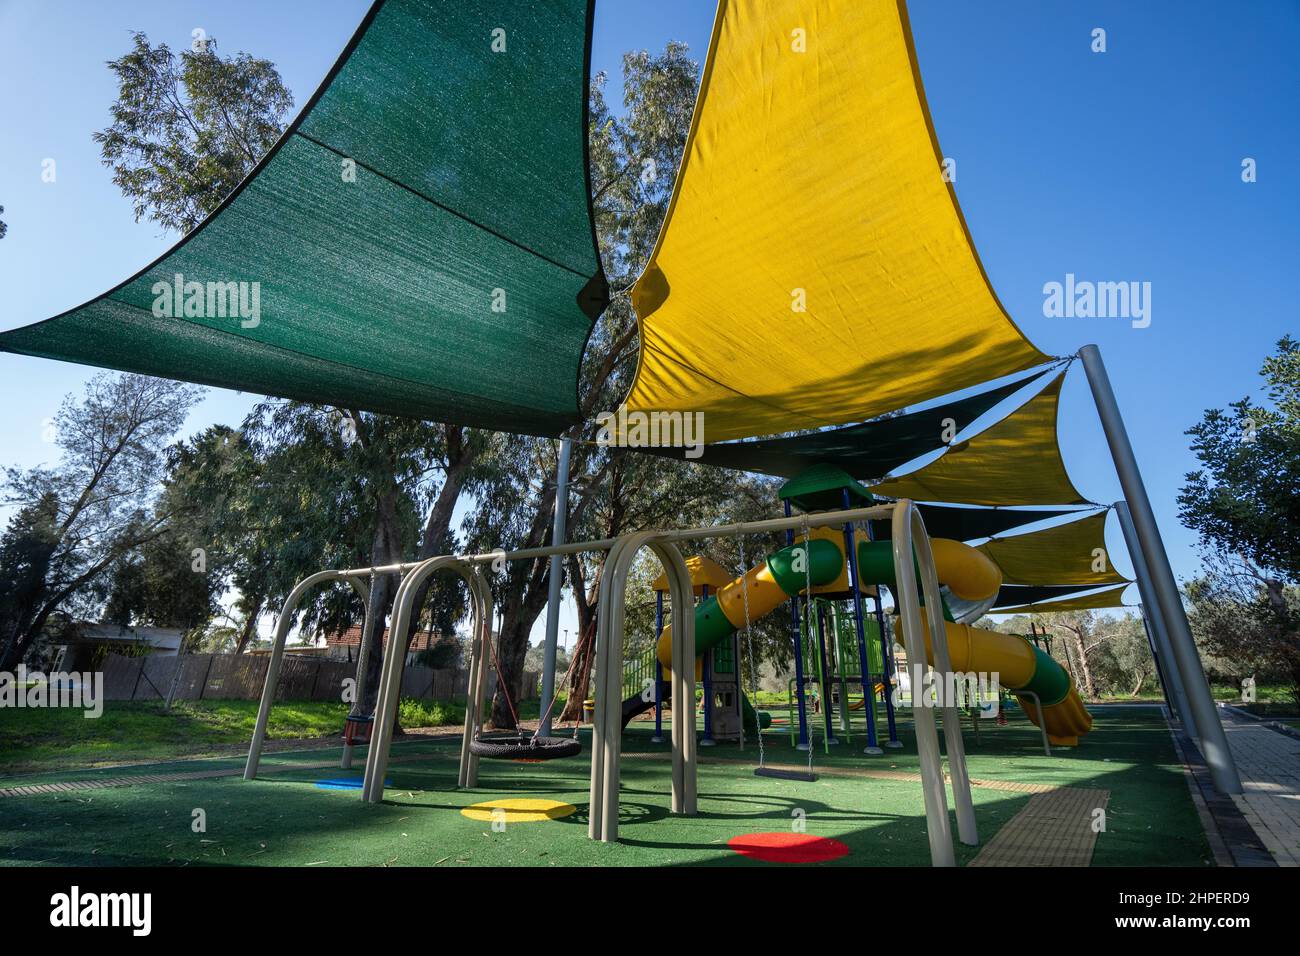 Playgrounds for children in villages in Israel Stock Photo